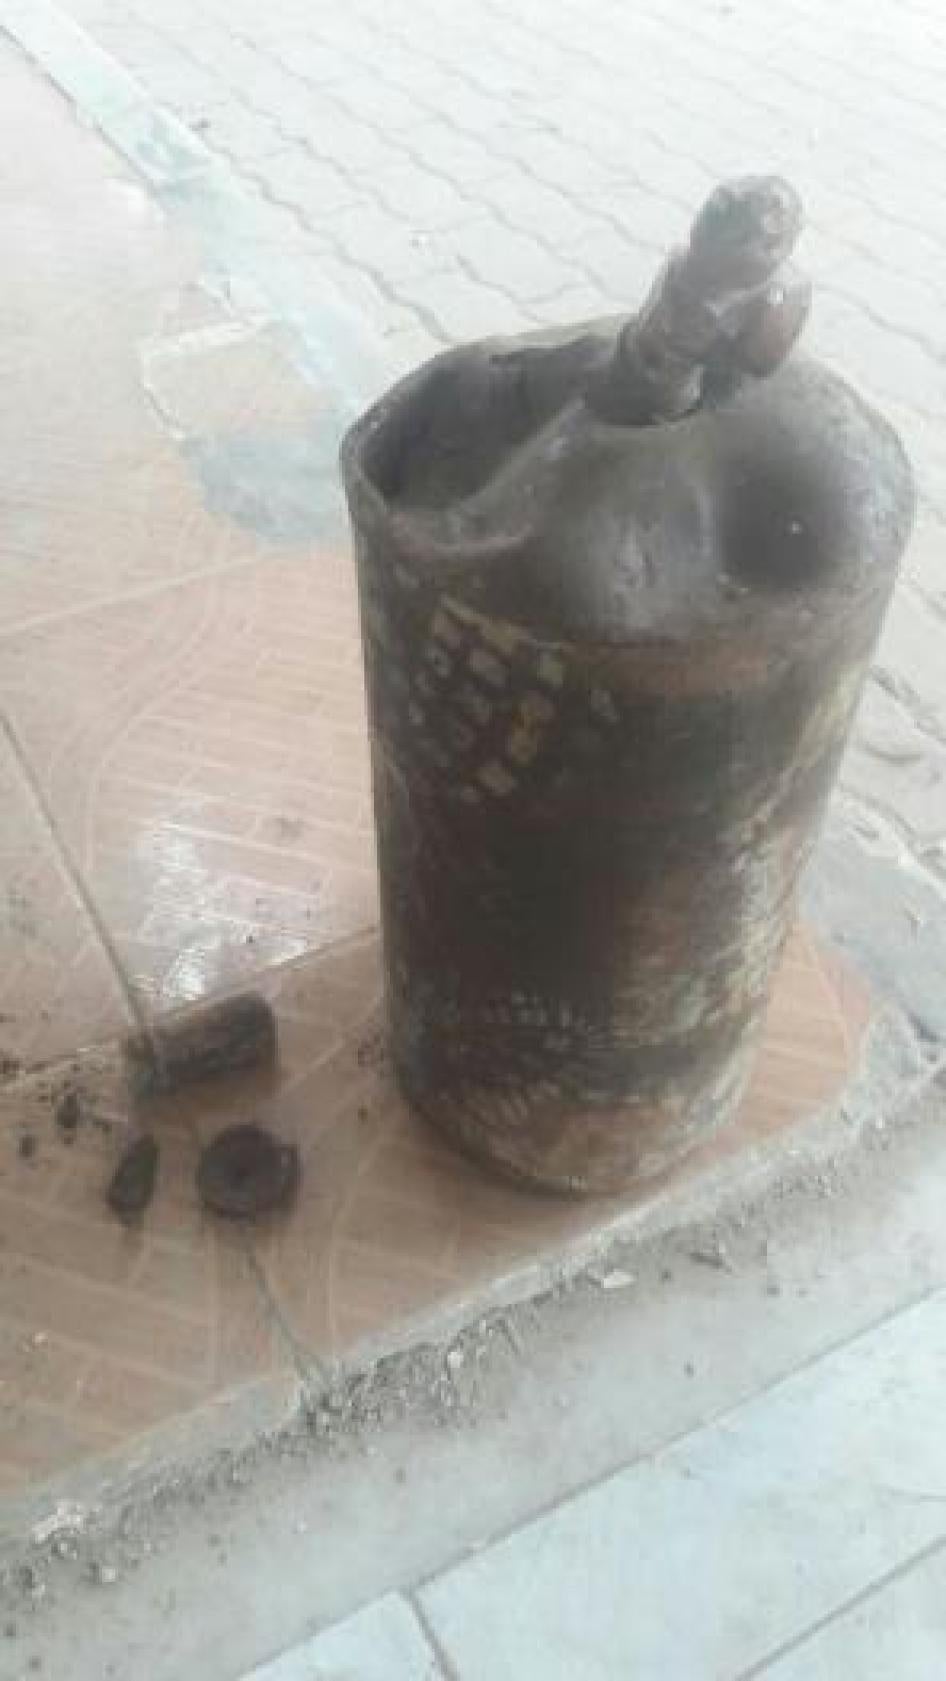 Deformed gas cylinder that a Syria Civil Defense member said was found at the site of a March 29 attack in the Qaboun neighborhood in eastern Damascus, which is controlled by armed groups fighting the government.